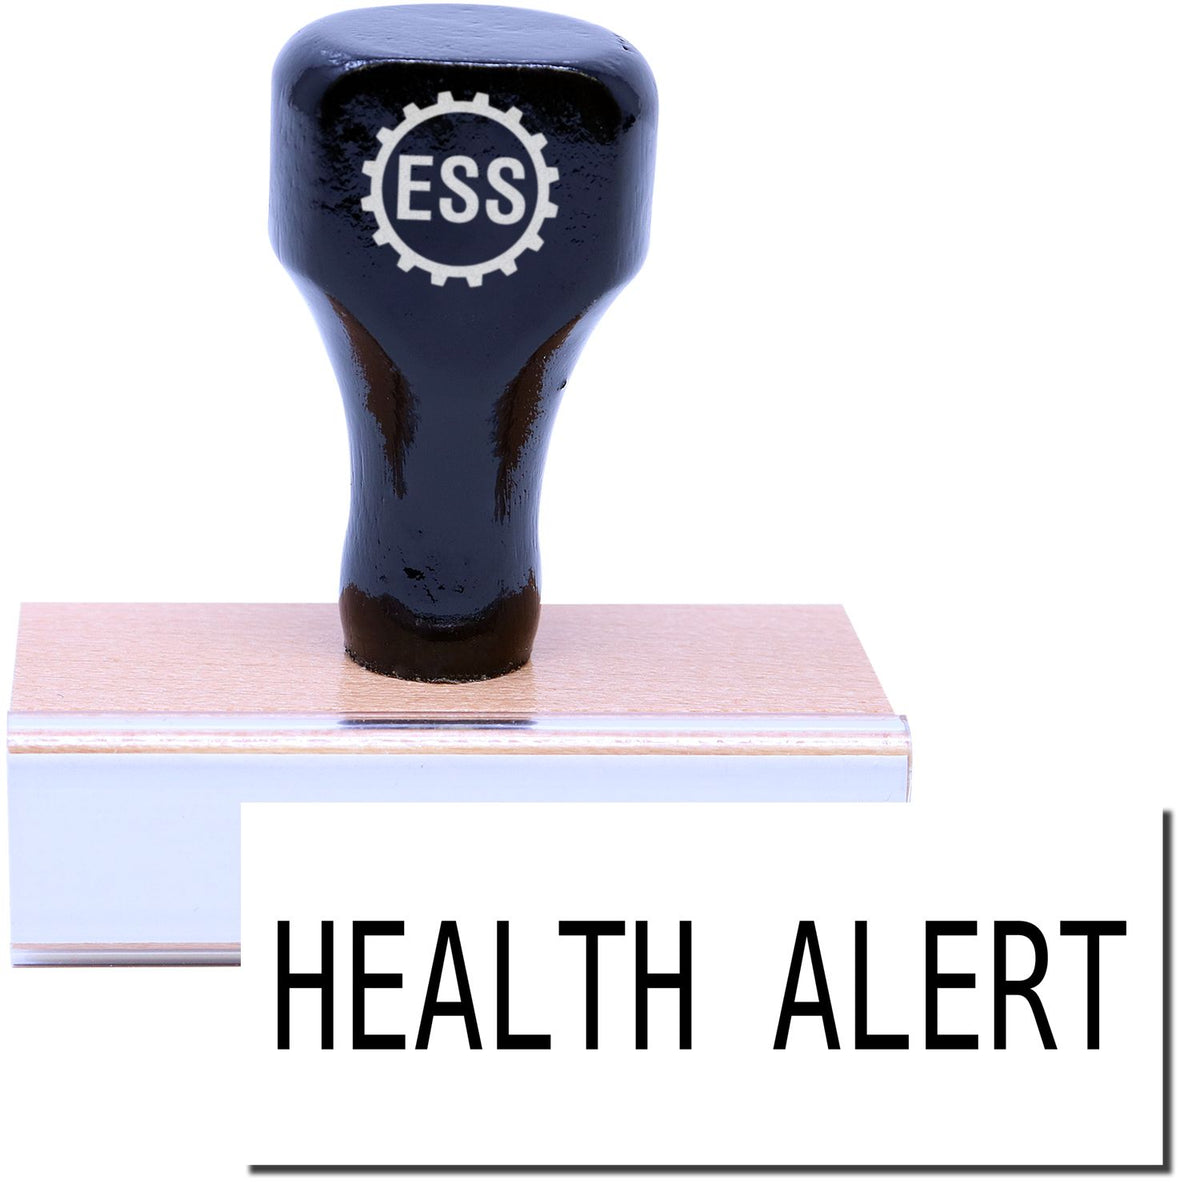 A stock office rubber stamp with a stamped image showing how the text &quot;HEALTH ALERT&quot; is displayed after stamping.